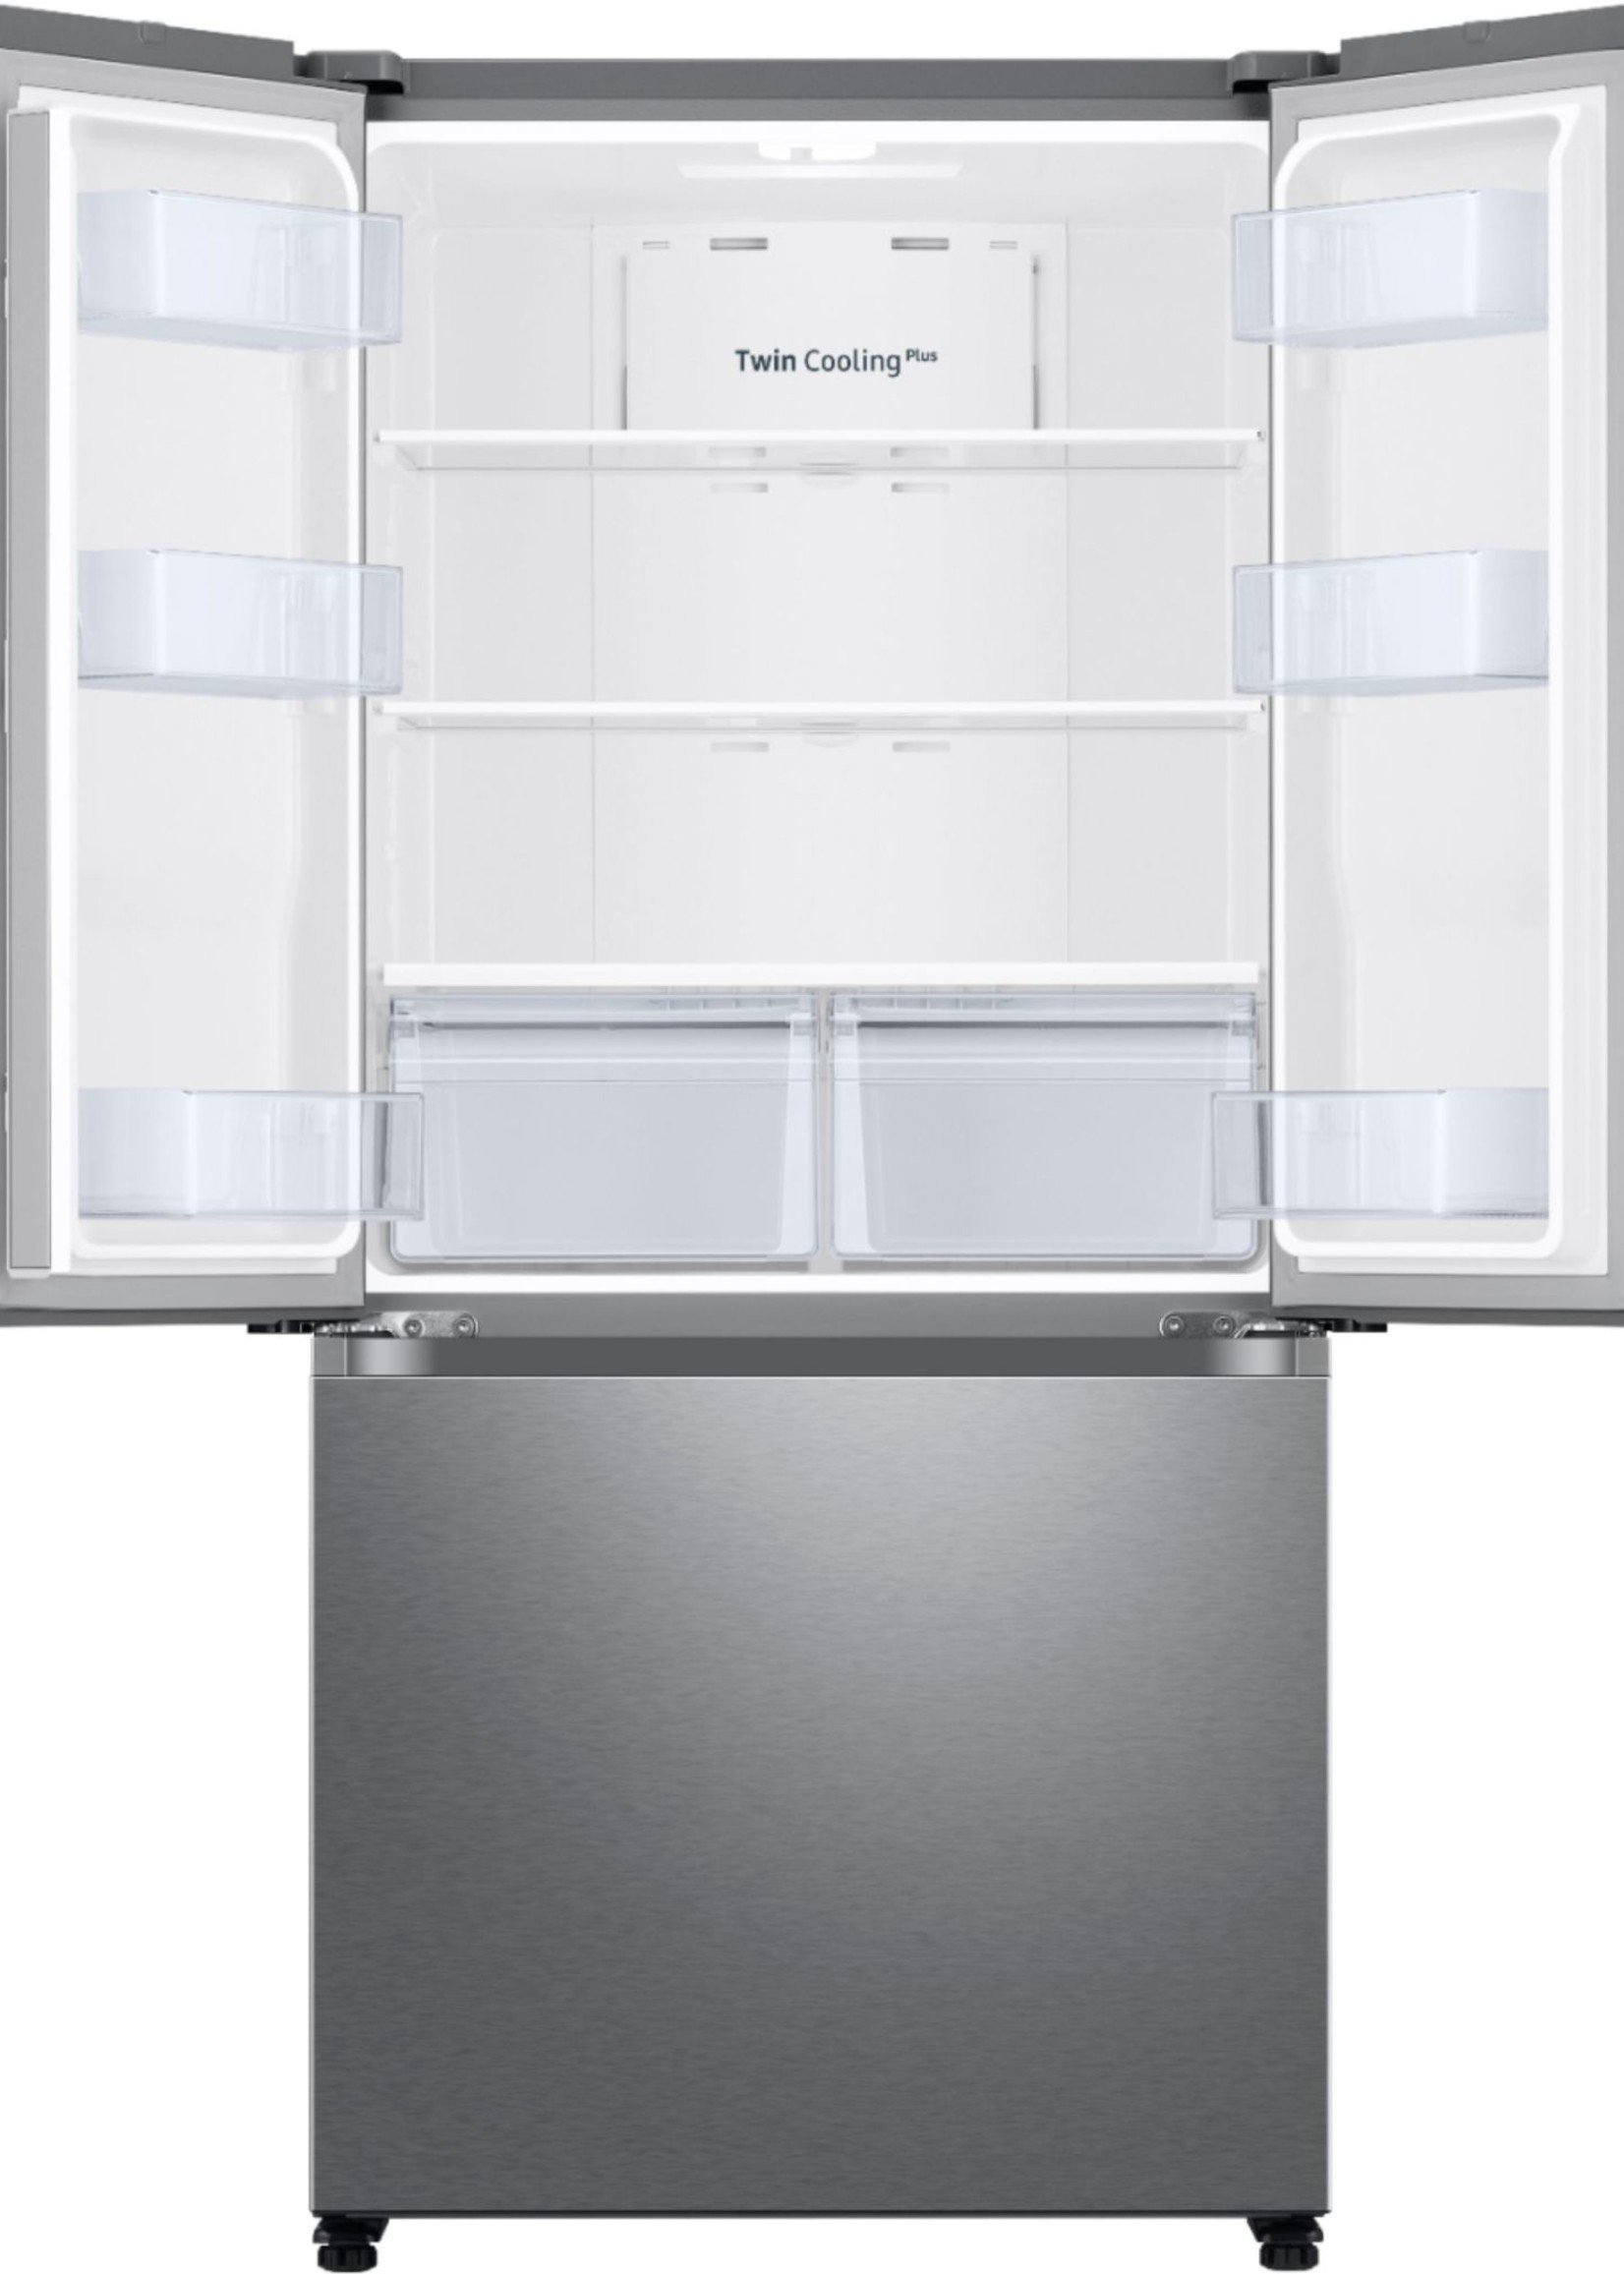 Samsung *Samsung  RF18A5101SR   17.5 cu. ft. 3-Door French Door Counter Depth Refrigerator with WiFi and Twin Cooling Plus® - Fingerprint Resistant Stainless Steel